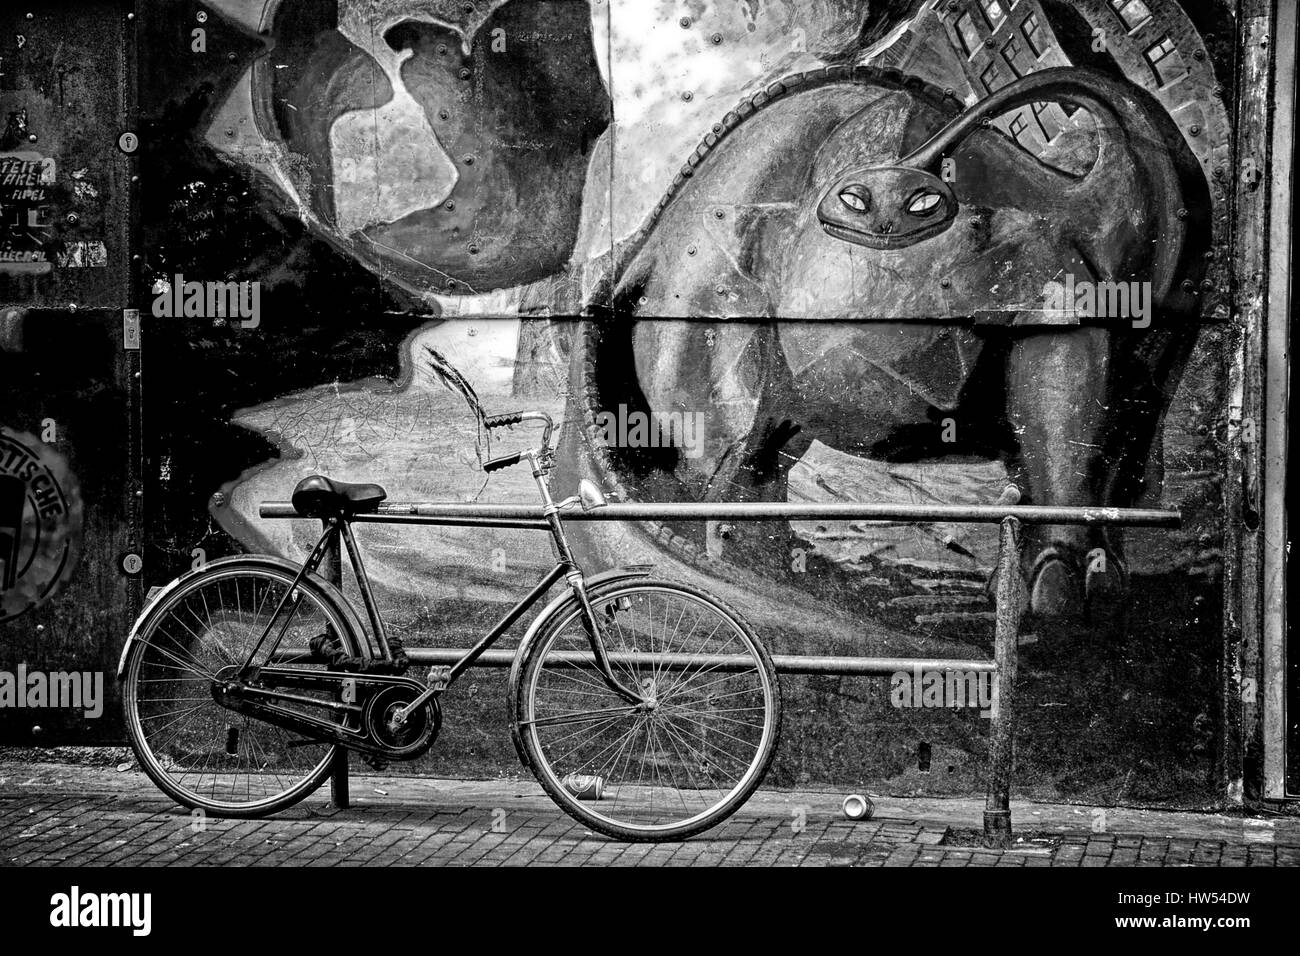 Graffiti artwork of a prehistoric animal appearing to be viewing a bicycle parked in the street. Amsterdam, Netherlands. Stock Photo